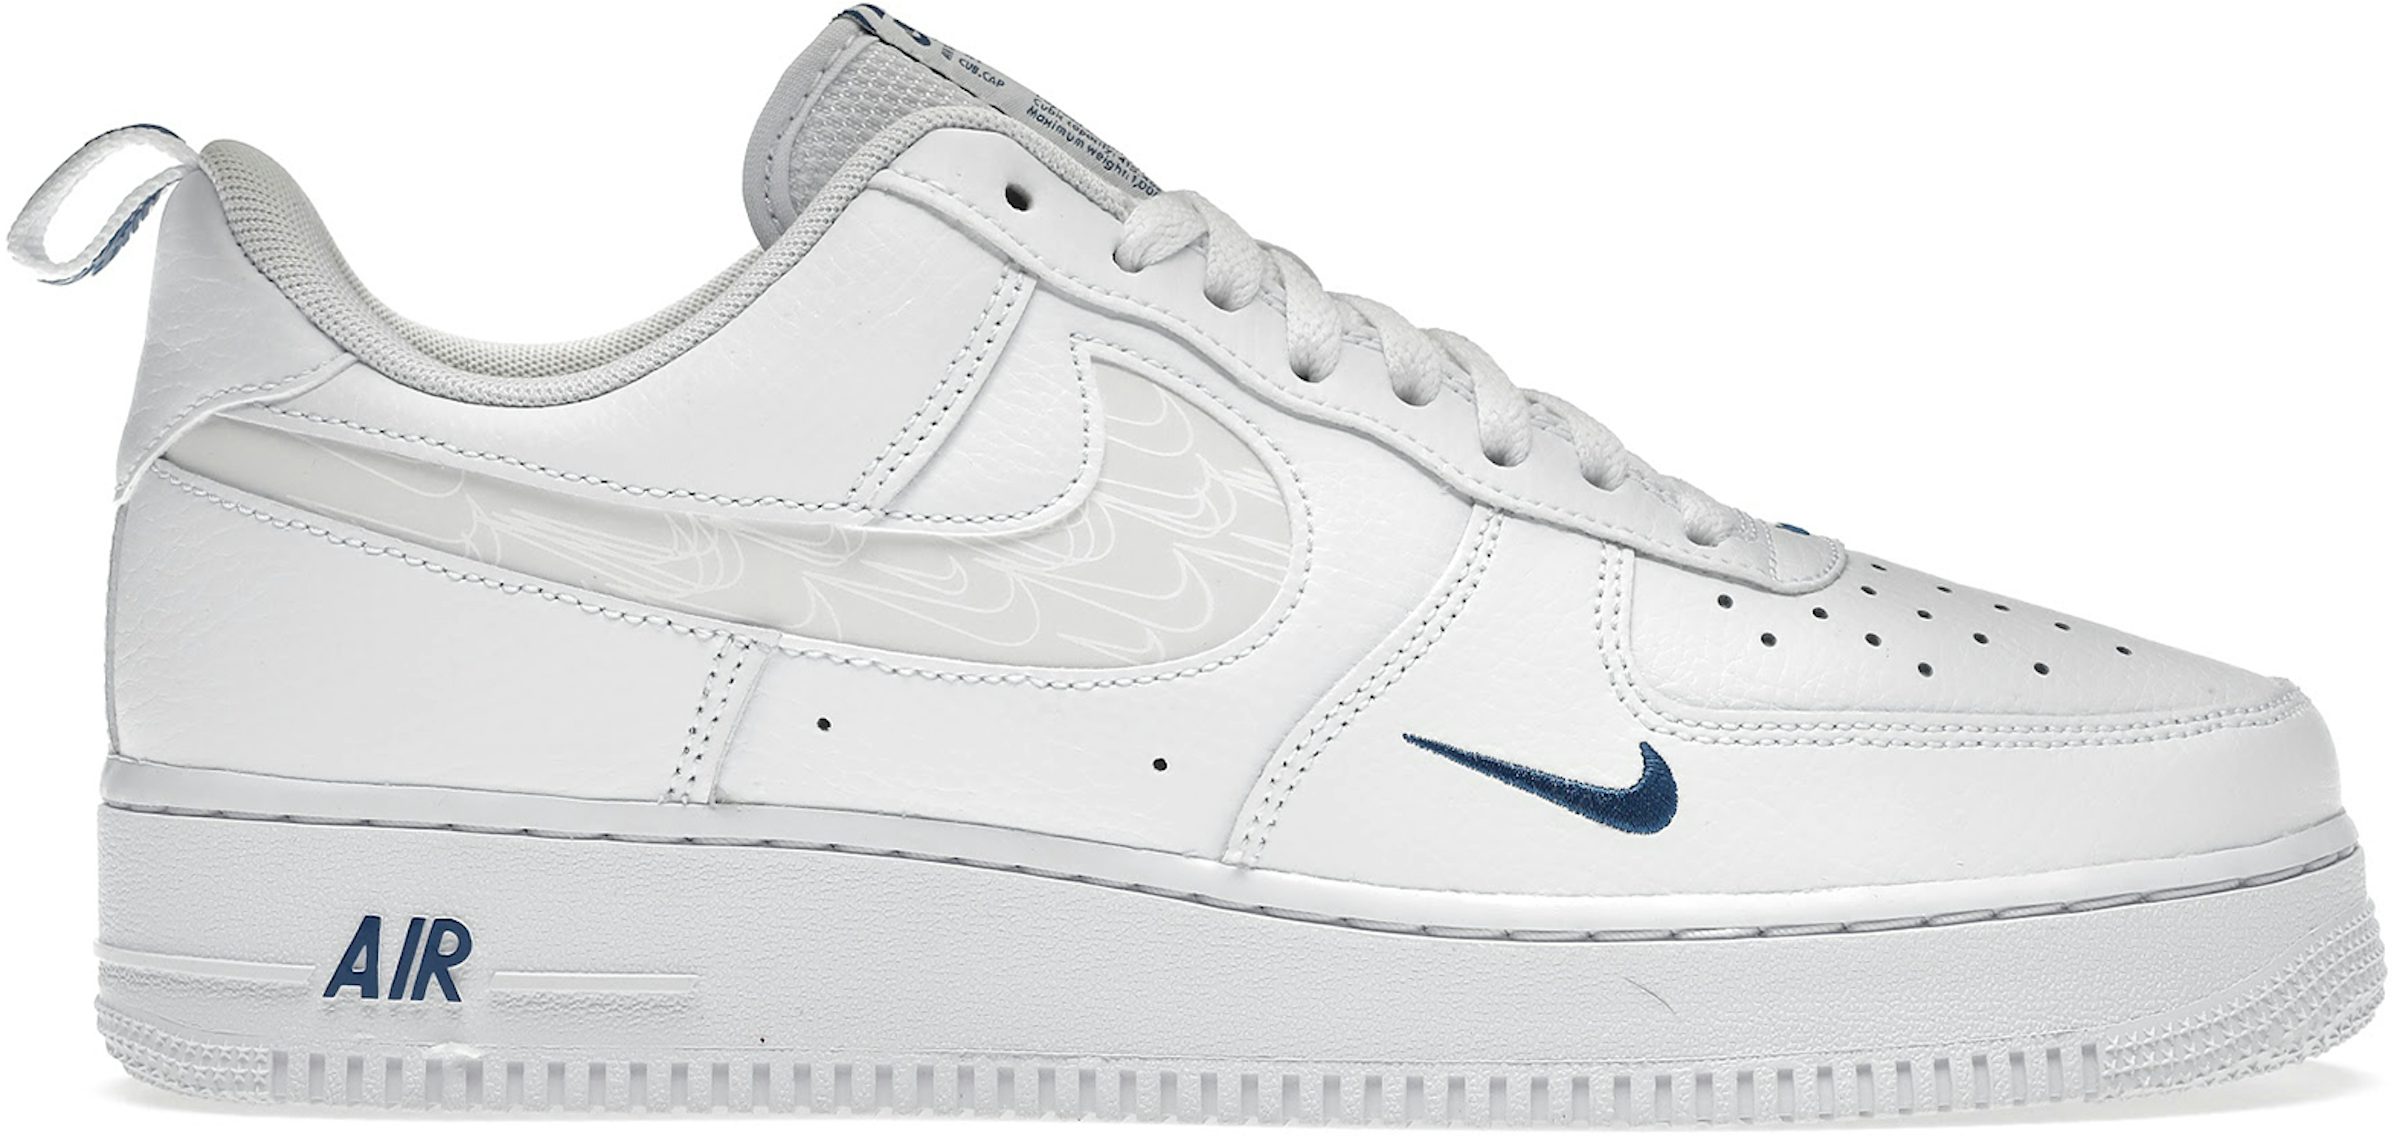 Nike Air Force 1 Low Reflective Swoosh White Blue Men's - FB8971-100 - US